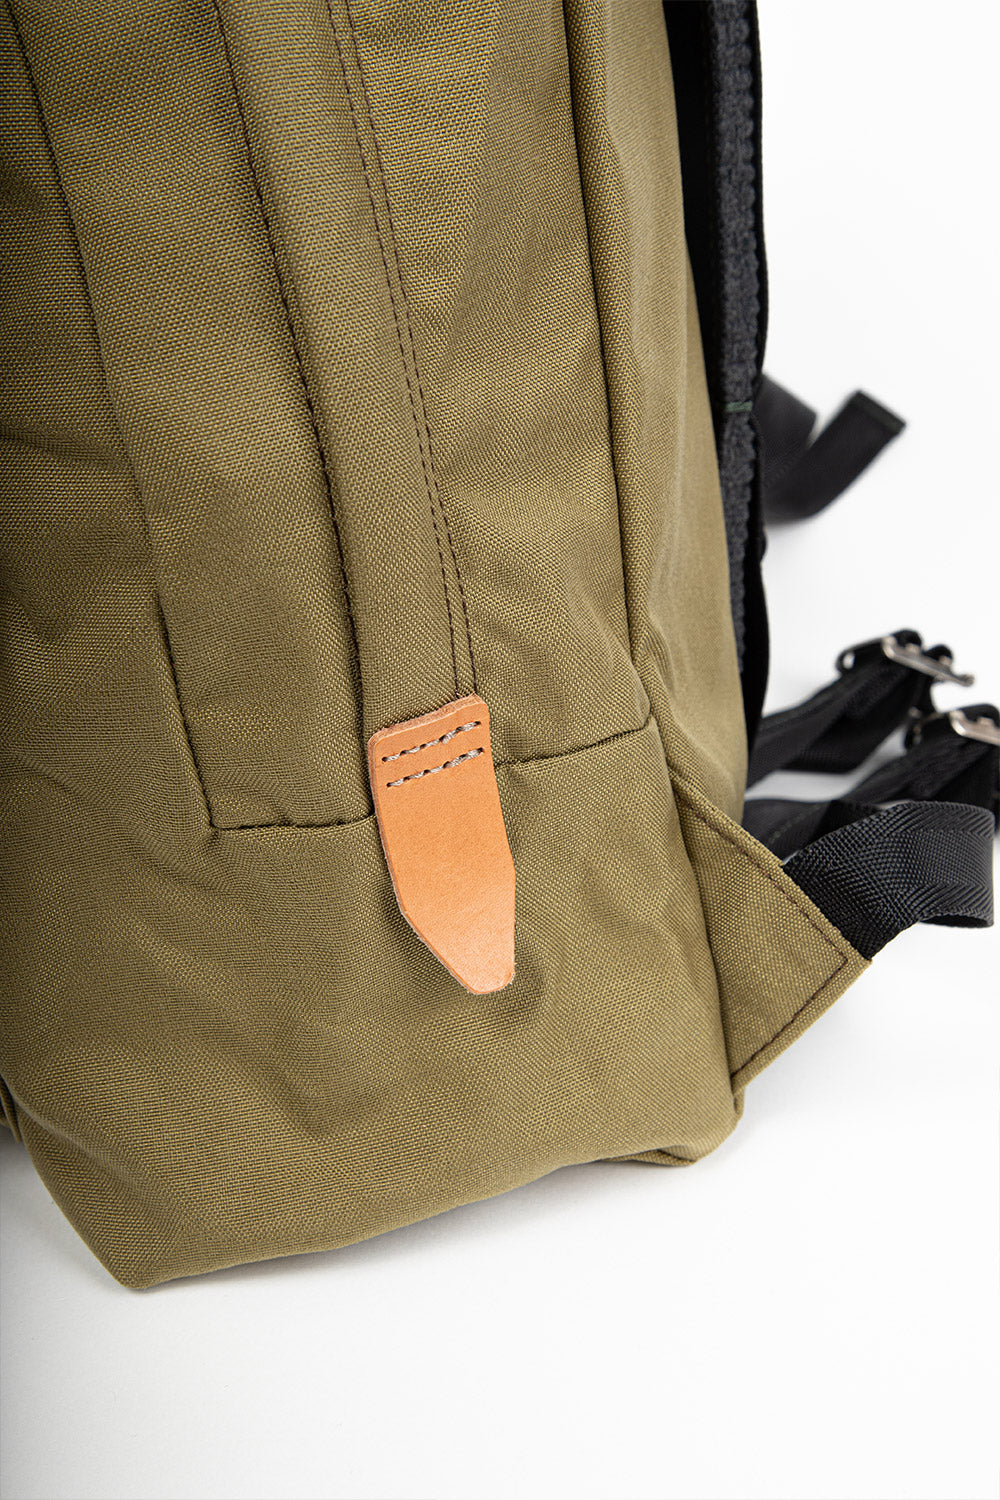 fredrik-packers-500D-day-pack